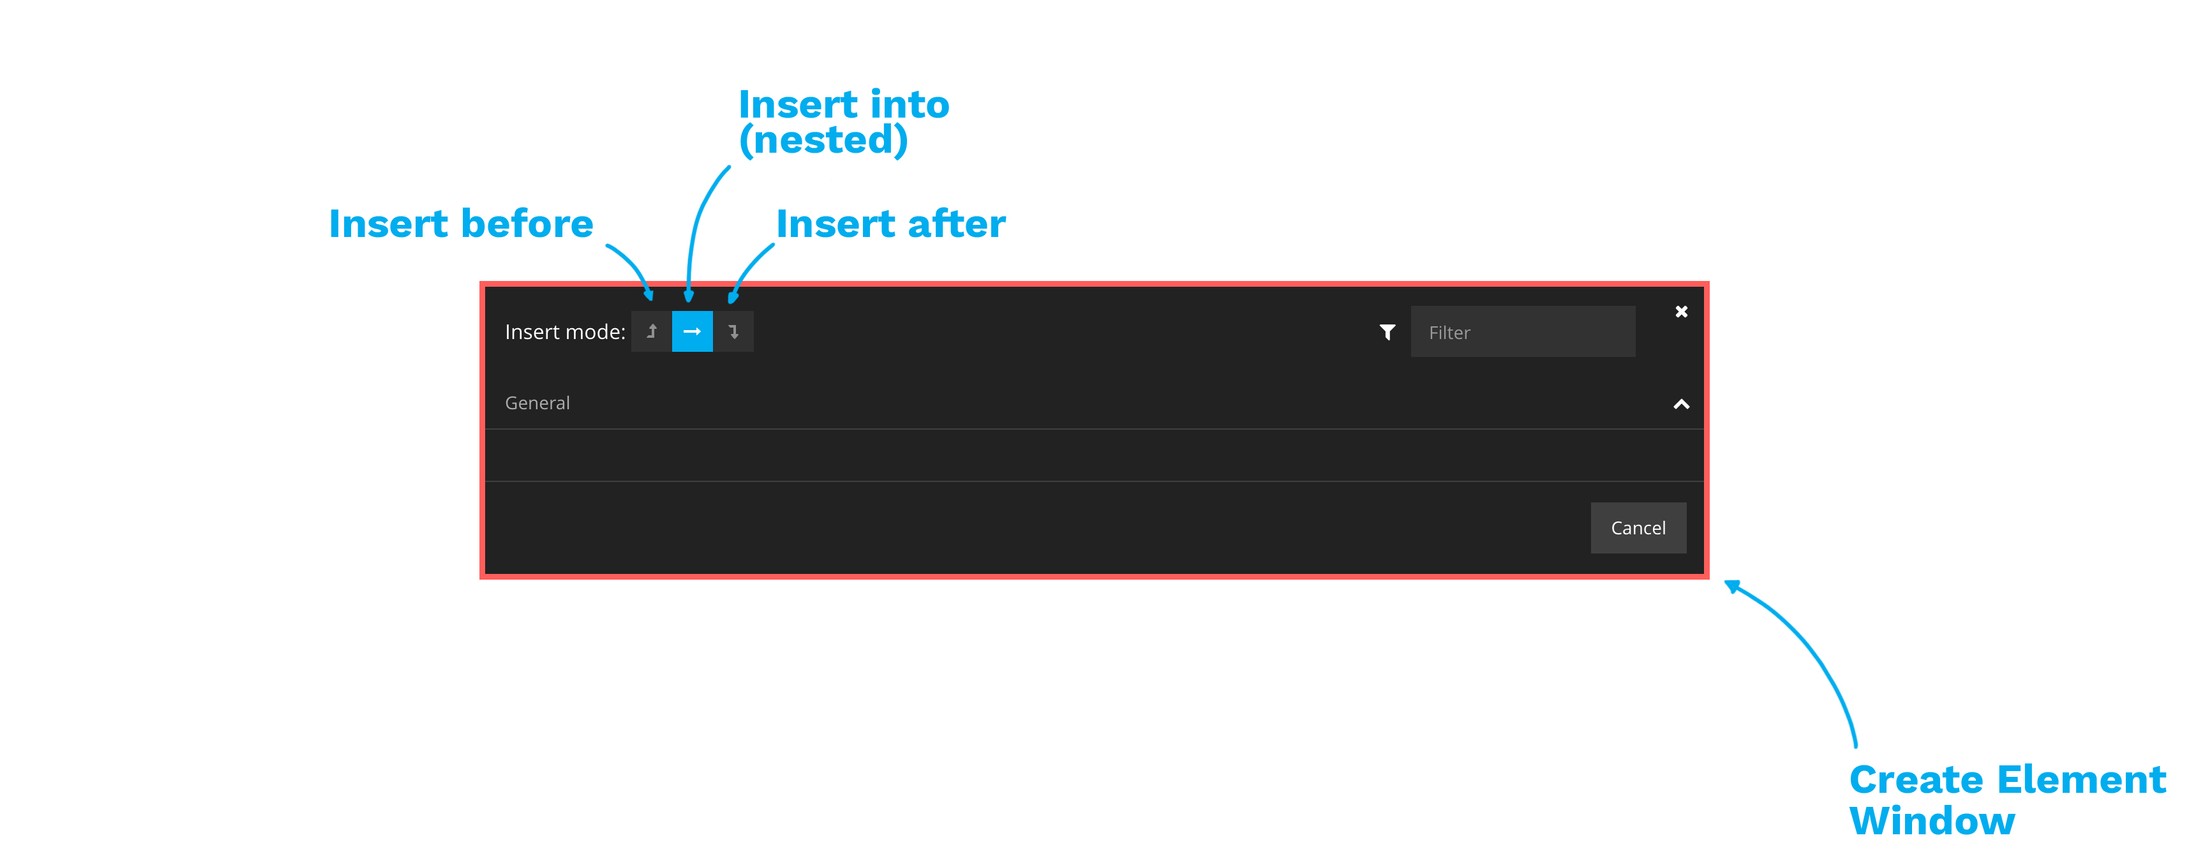 The Insert Element Window in the Neos user interface